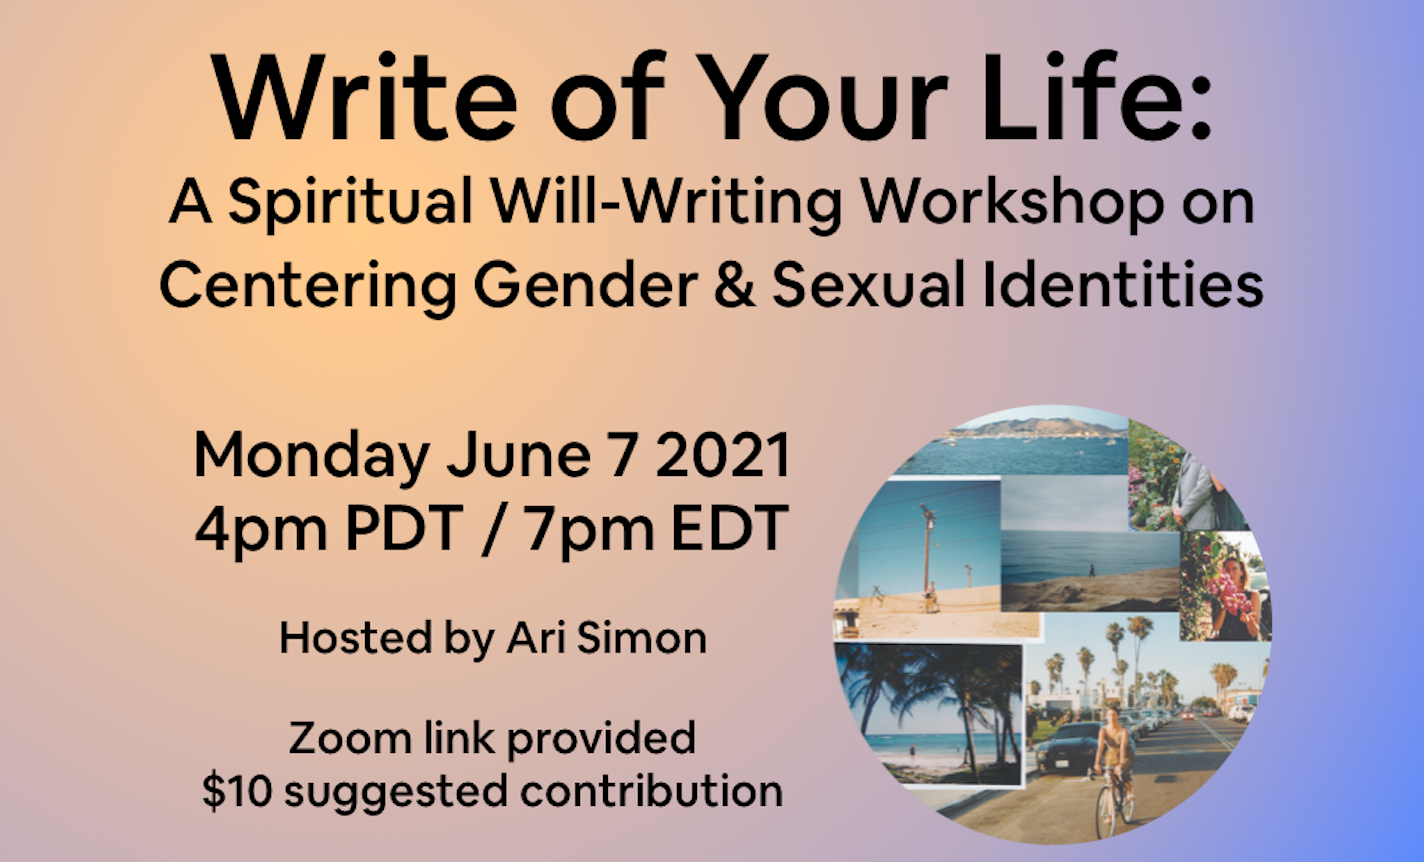 Write of Your Life: Gender & Sexuality in Spiritual Wills